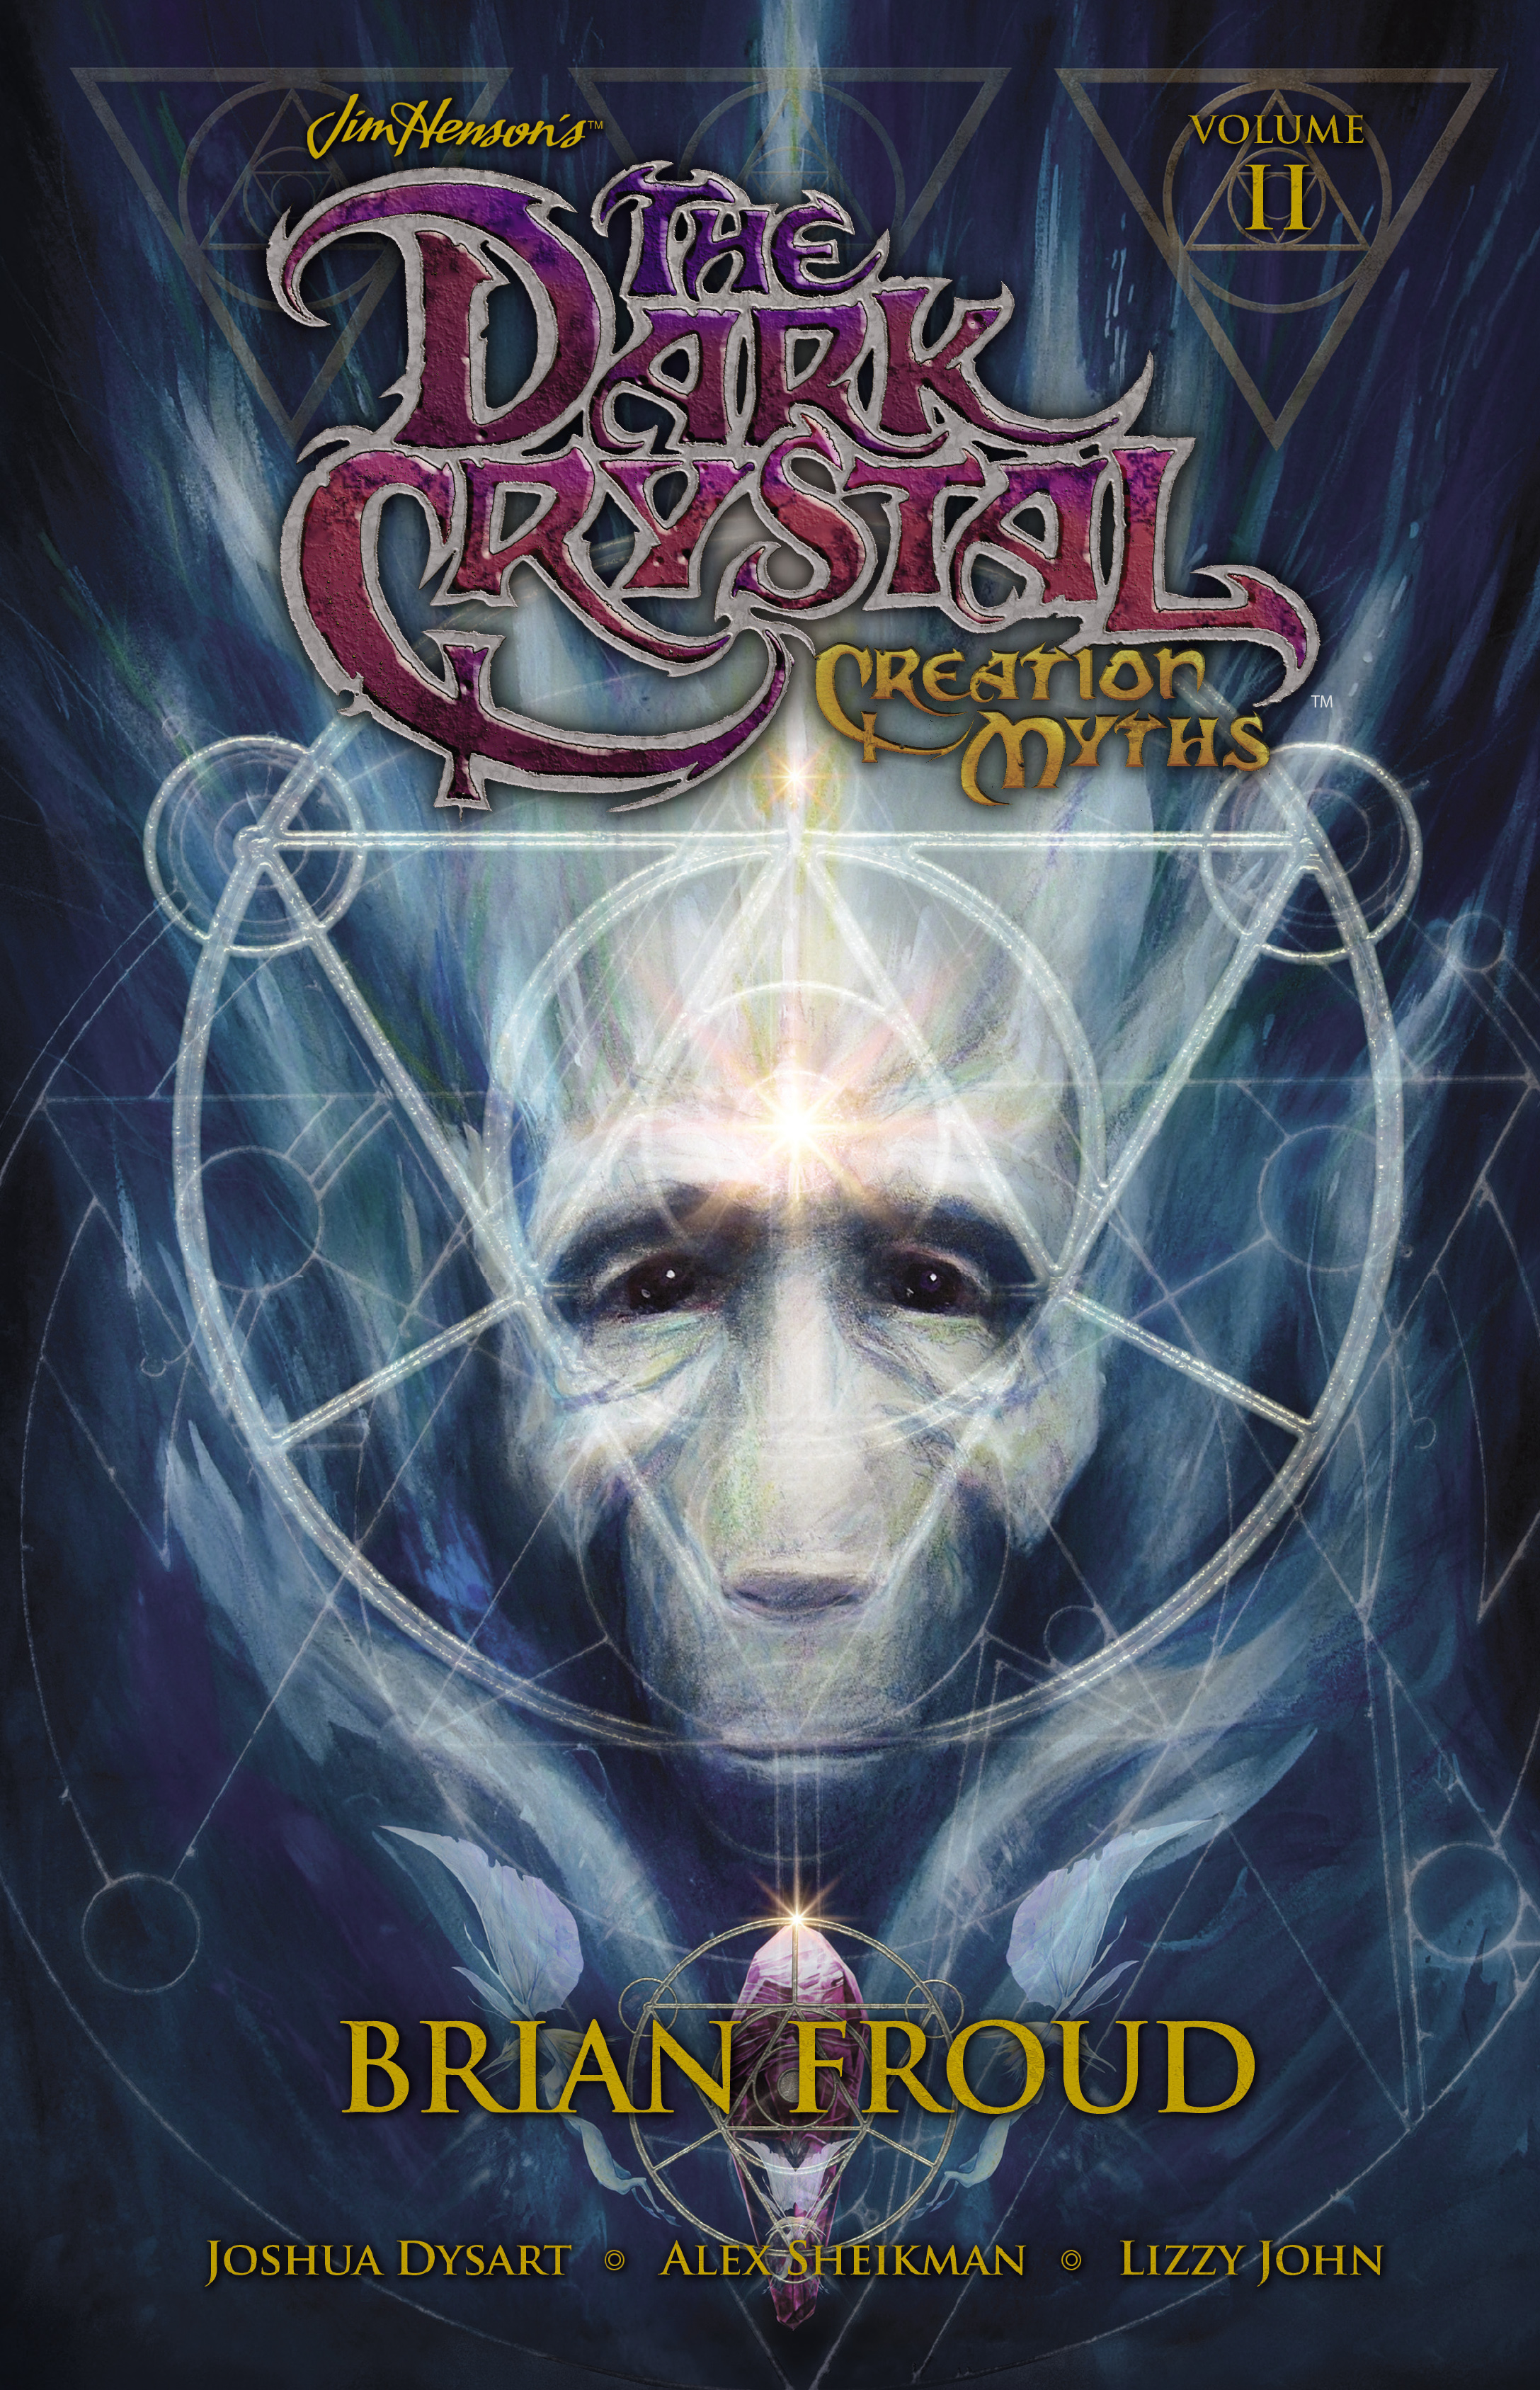 Read online The Dark Crystal: Creation Myths comic -  Issue # TPB 2 - 1